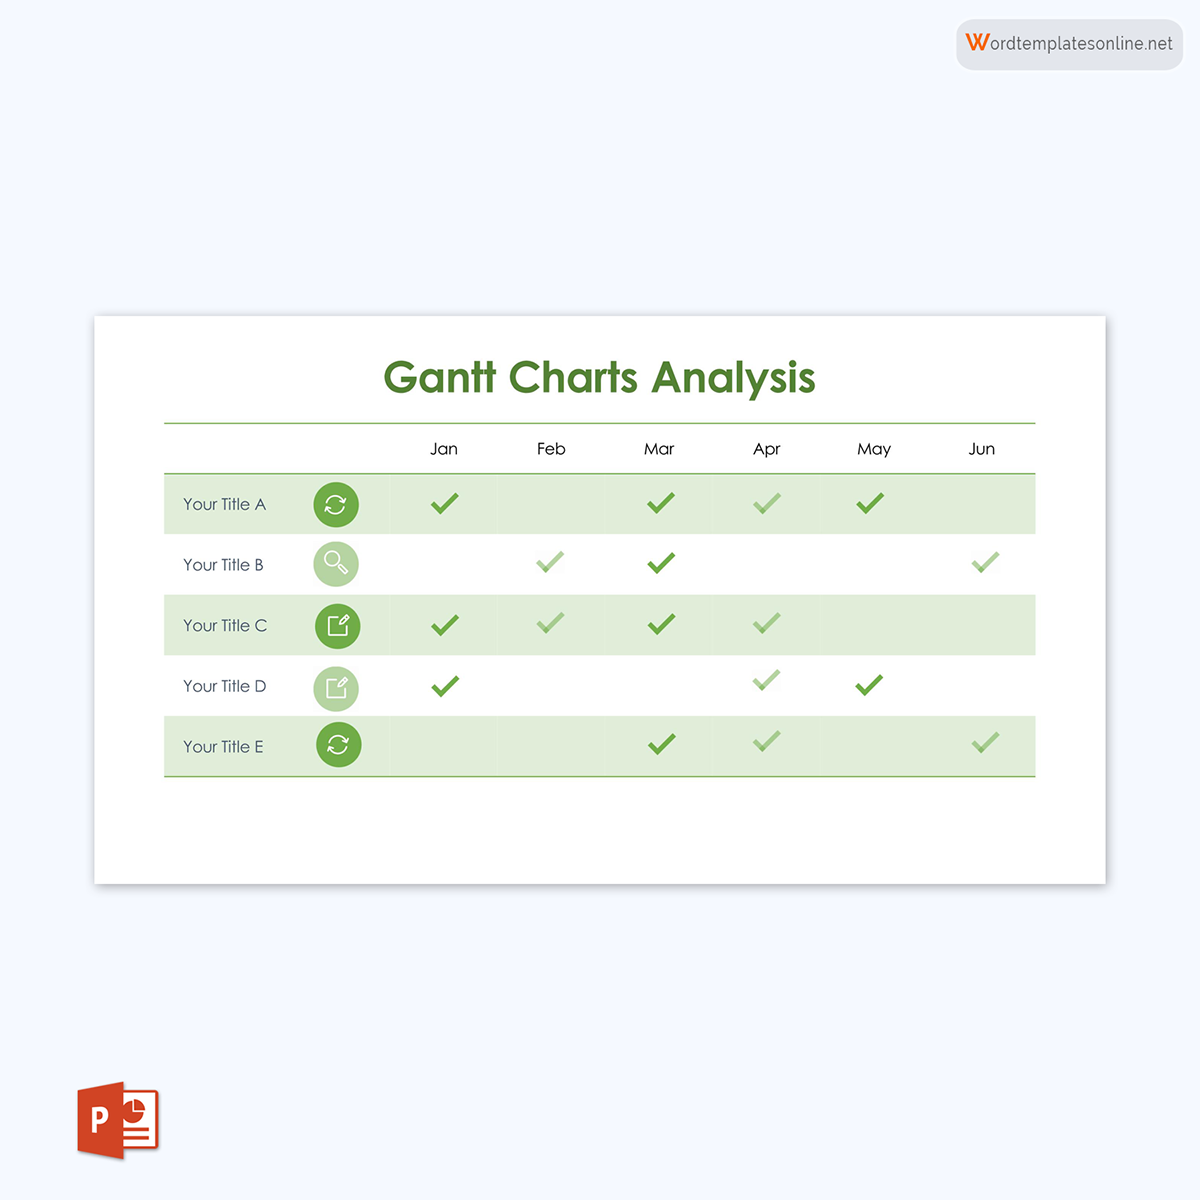 Great Fillable Half Yearly Gantt Chart Analysis Template 01 as PowerPoint Slides